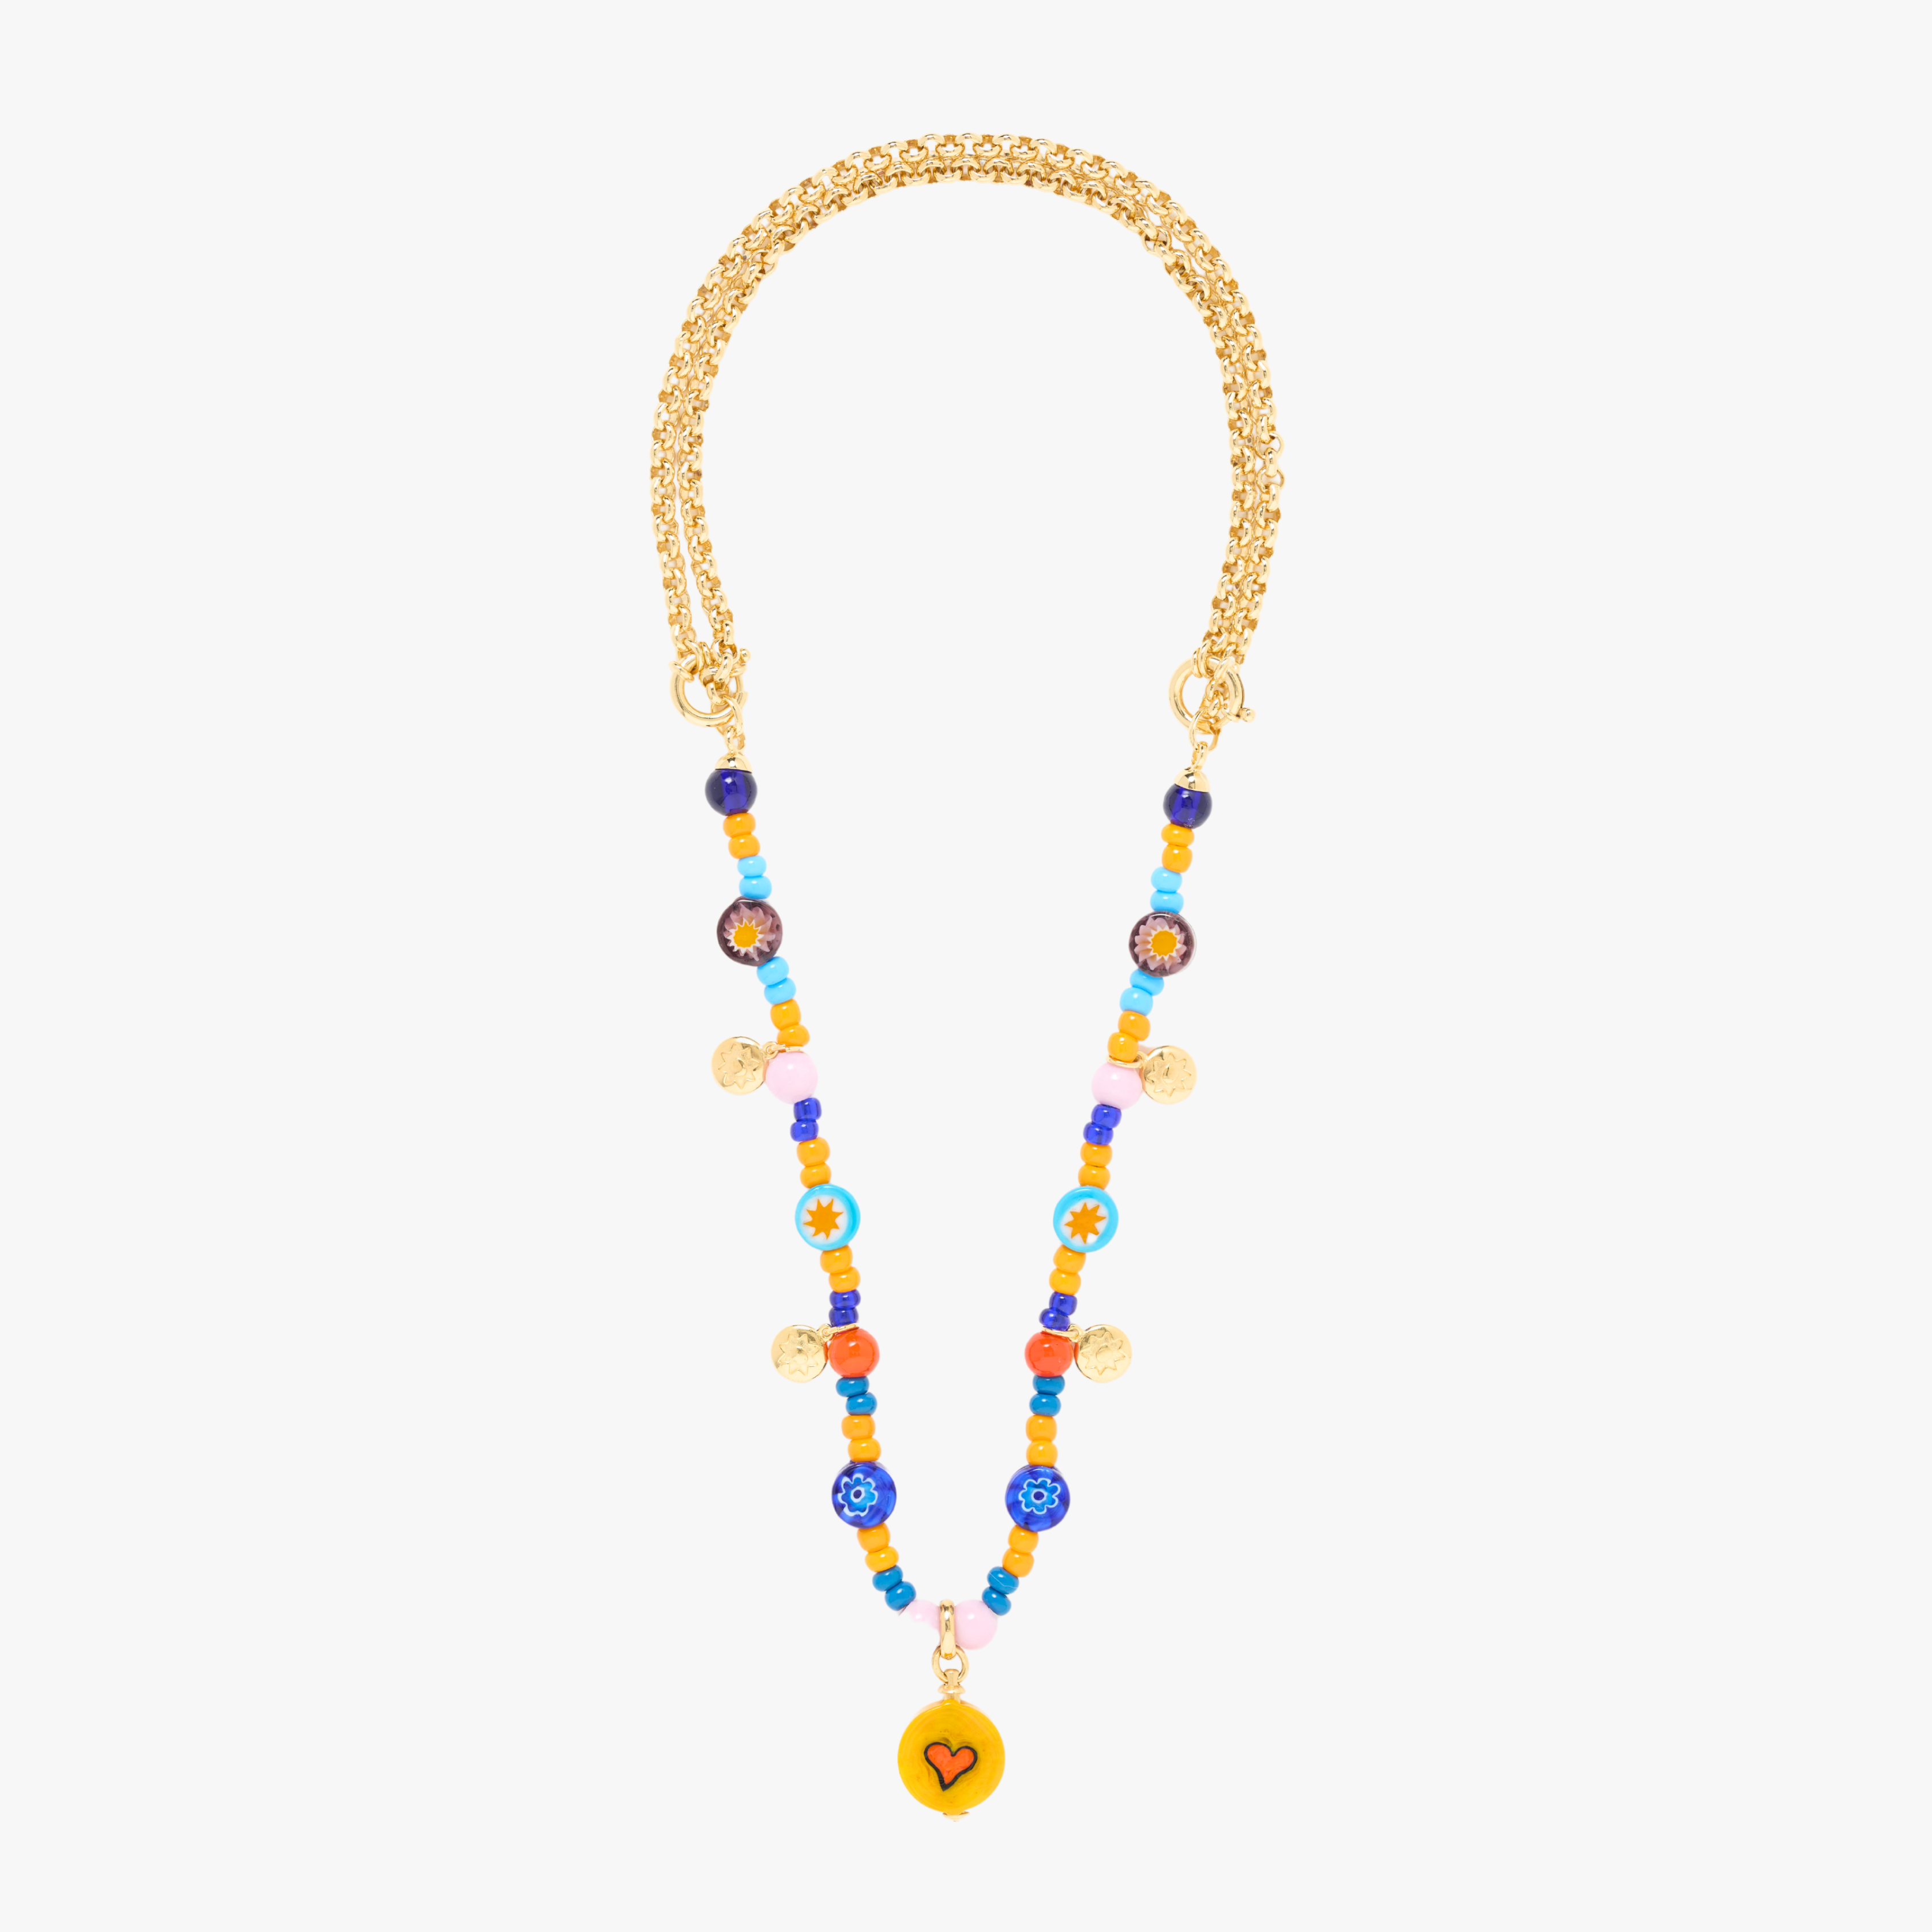 CARNEVALE NECKLACE - Yellow Heart